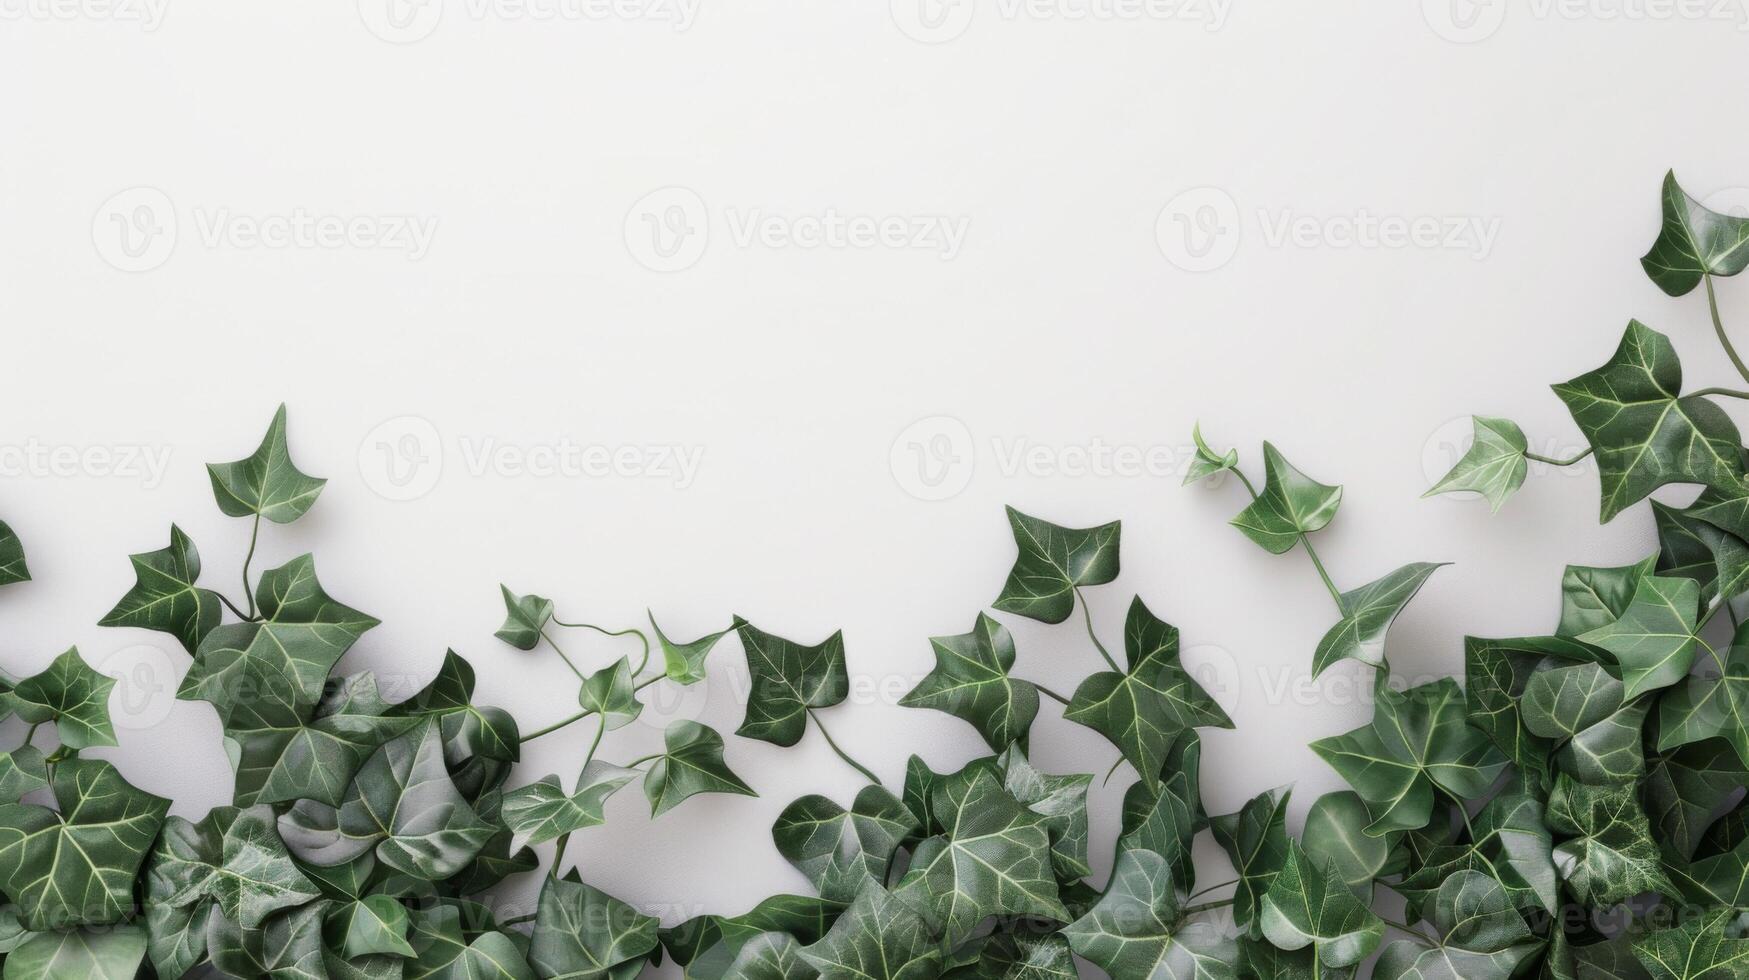 Ivy leaves creating a green nature-inspired wall with climbing plant texture for a fresh background photo